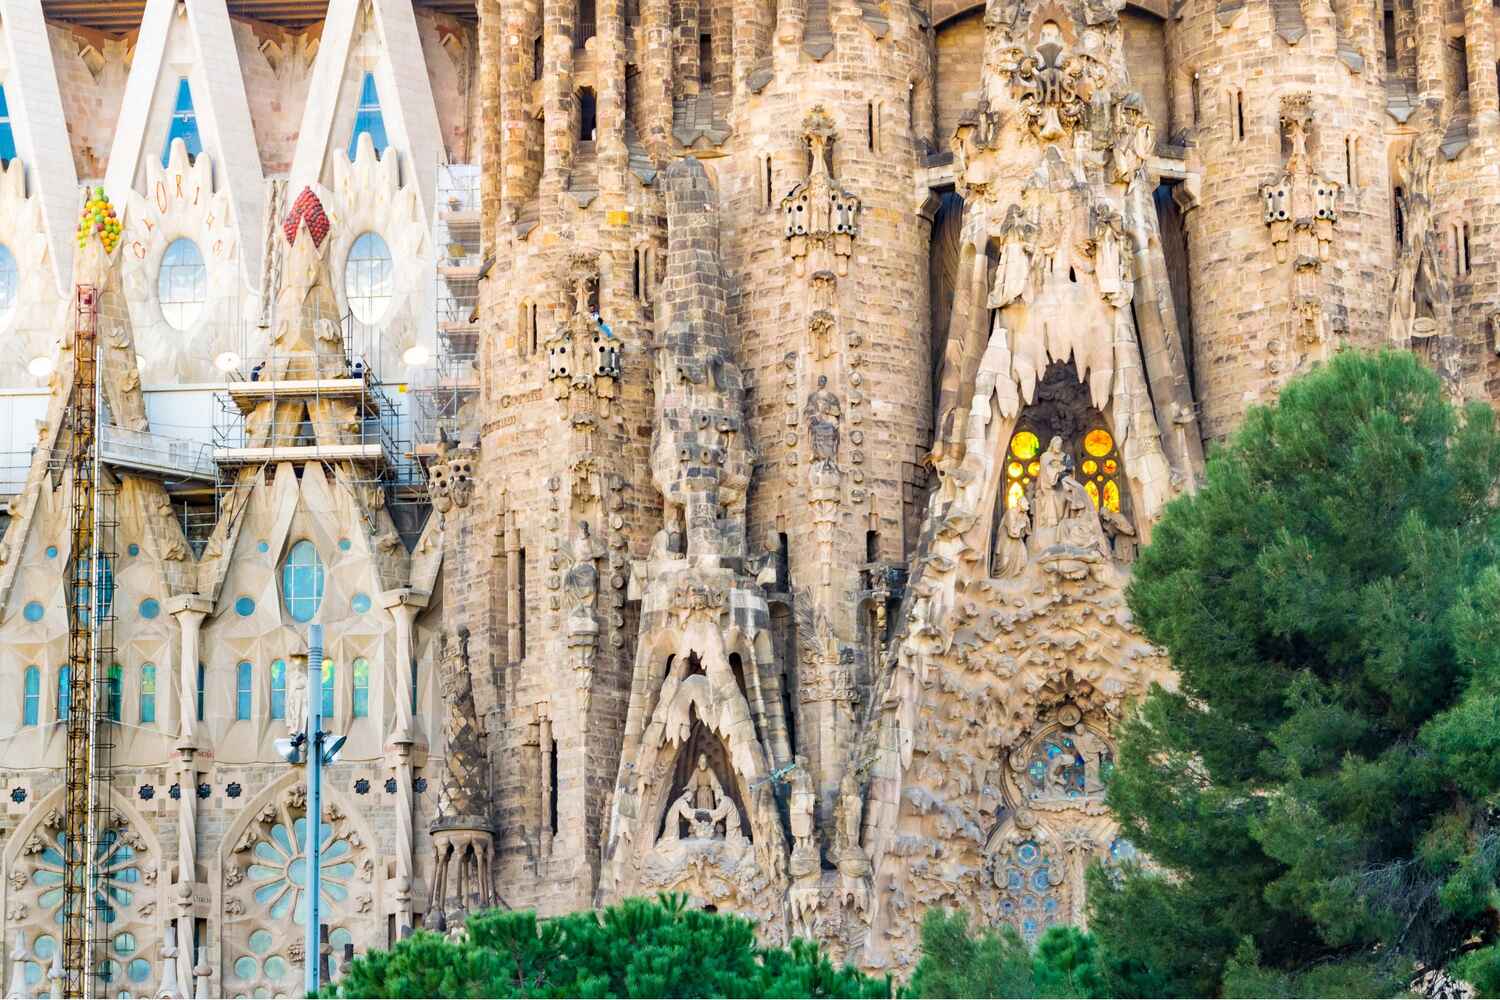 Close-up of La Sagrada Familia's Nativity façade with intricate sculptures and spires in Barcelona.